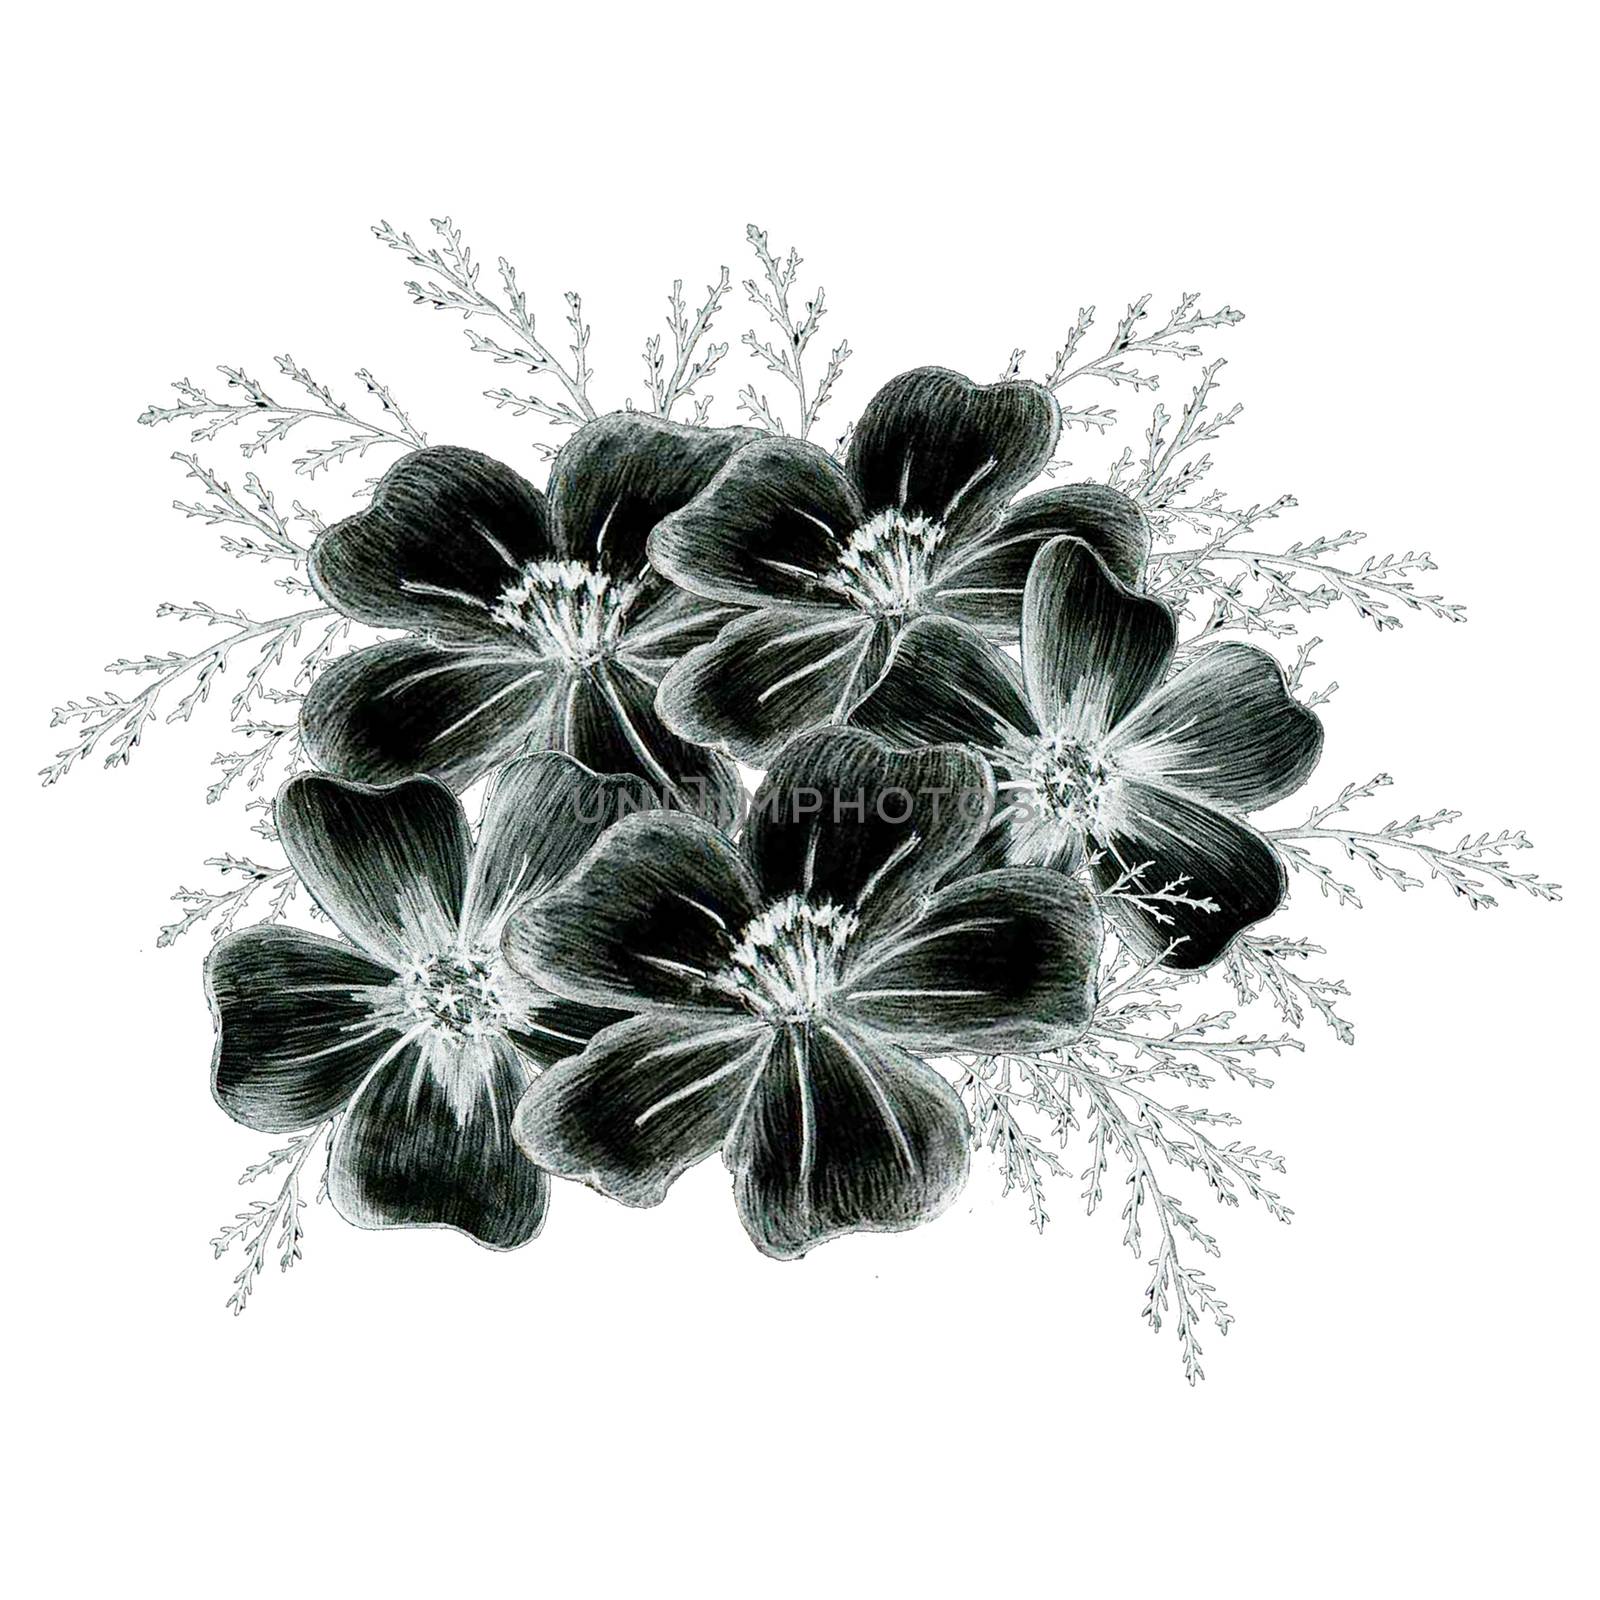 Black and White Hand-Drawn Flower Composition. Thin-leaved Marigolds Sketch. by Rina_Dozornaya